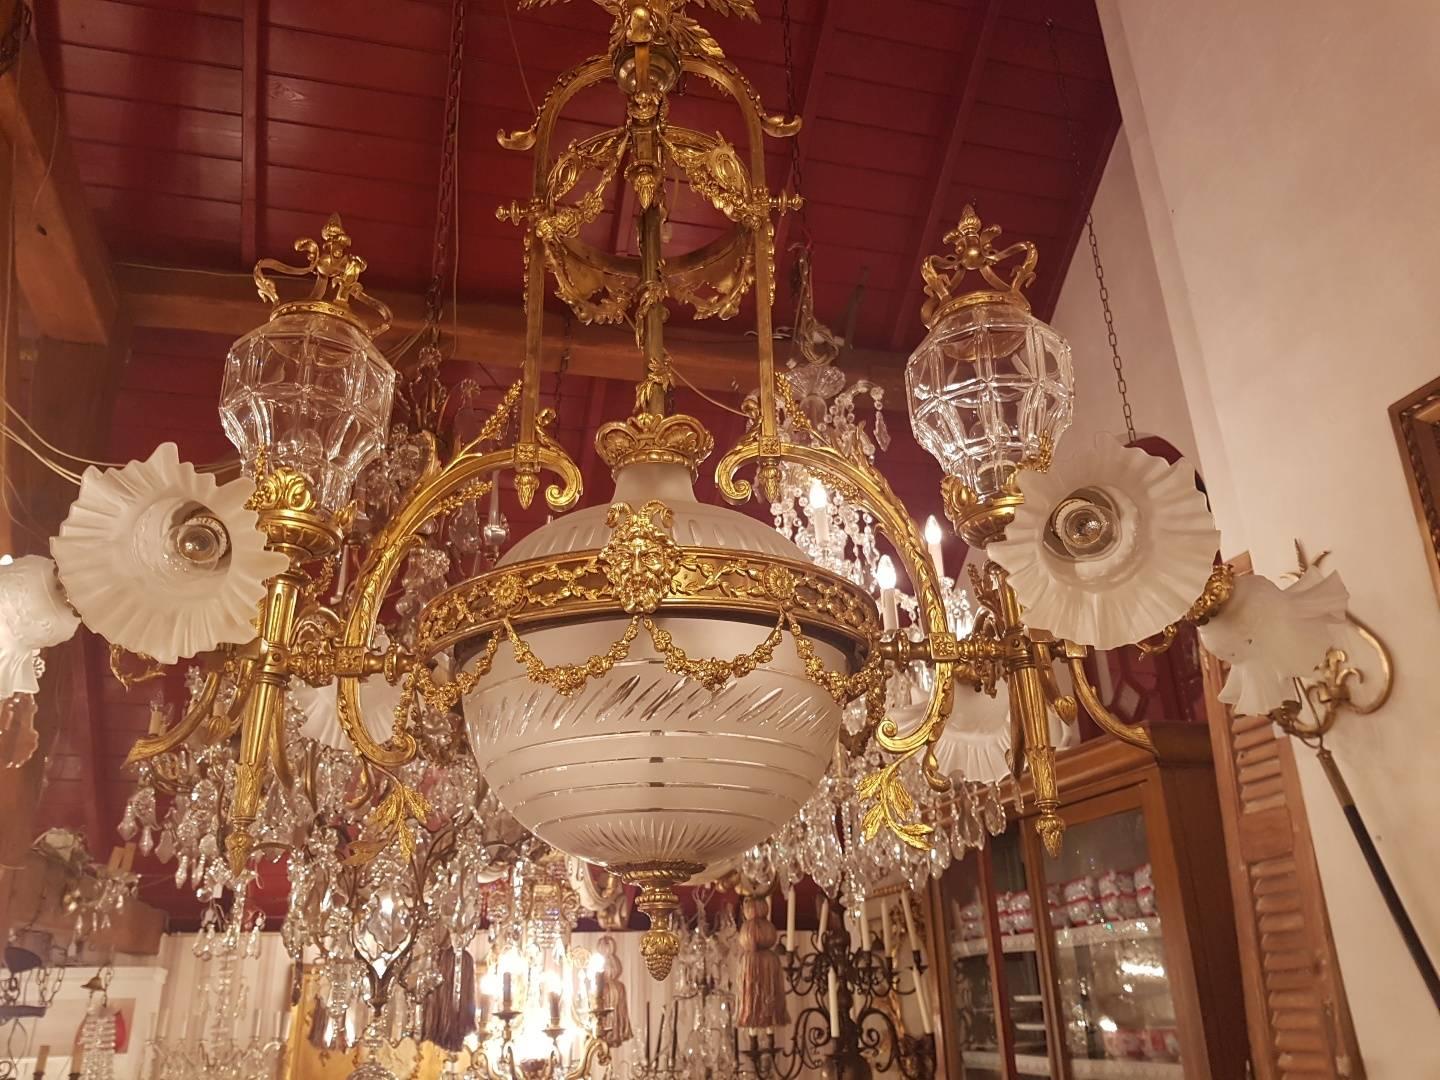 Large Empire Style bronze chandelier with two large lanterns with beveled glass, Beautiful ornaments like guirlandes and a globe from Victorian cut-glass with a diameter from 35 cm. unique piece.

This is just one of the collection of 1000